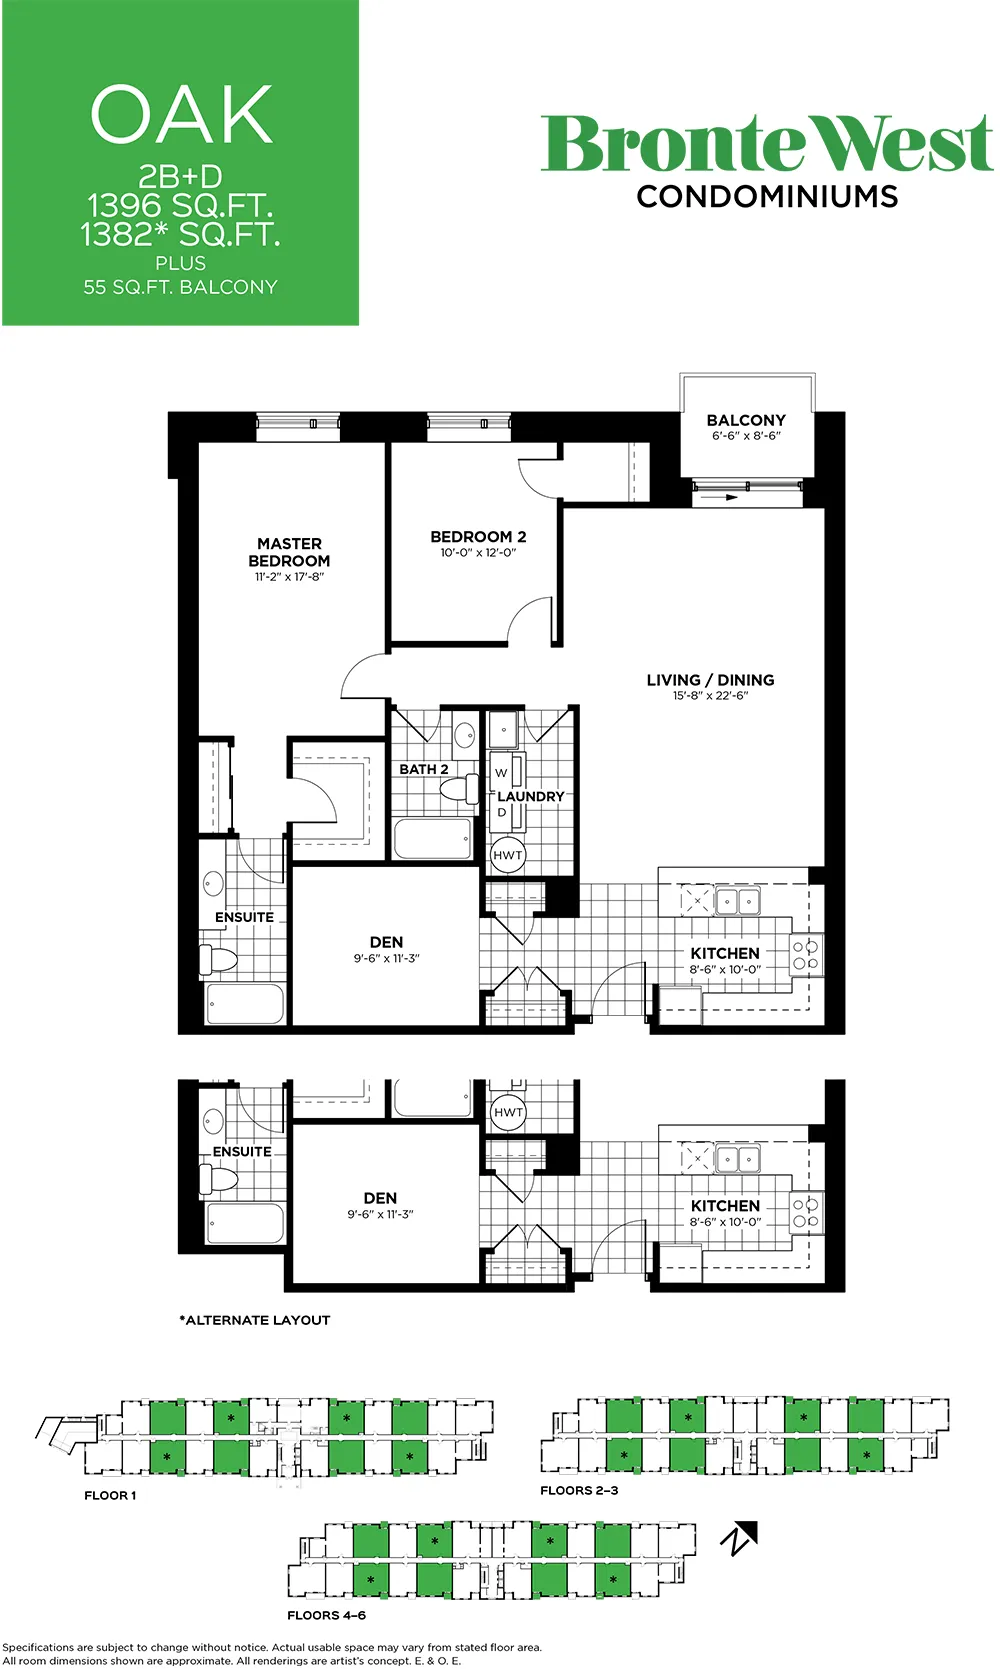  Floor Plan of Bronte West Condominiums with undefined beds